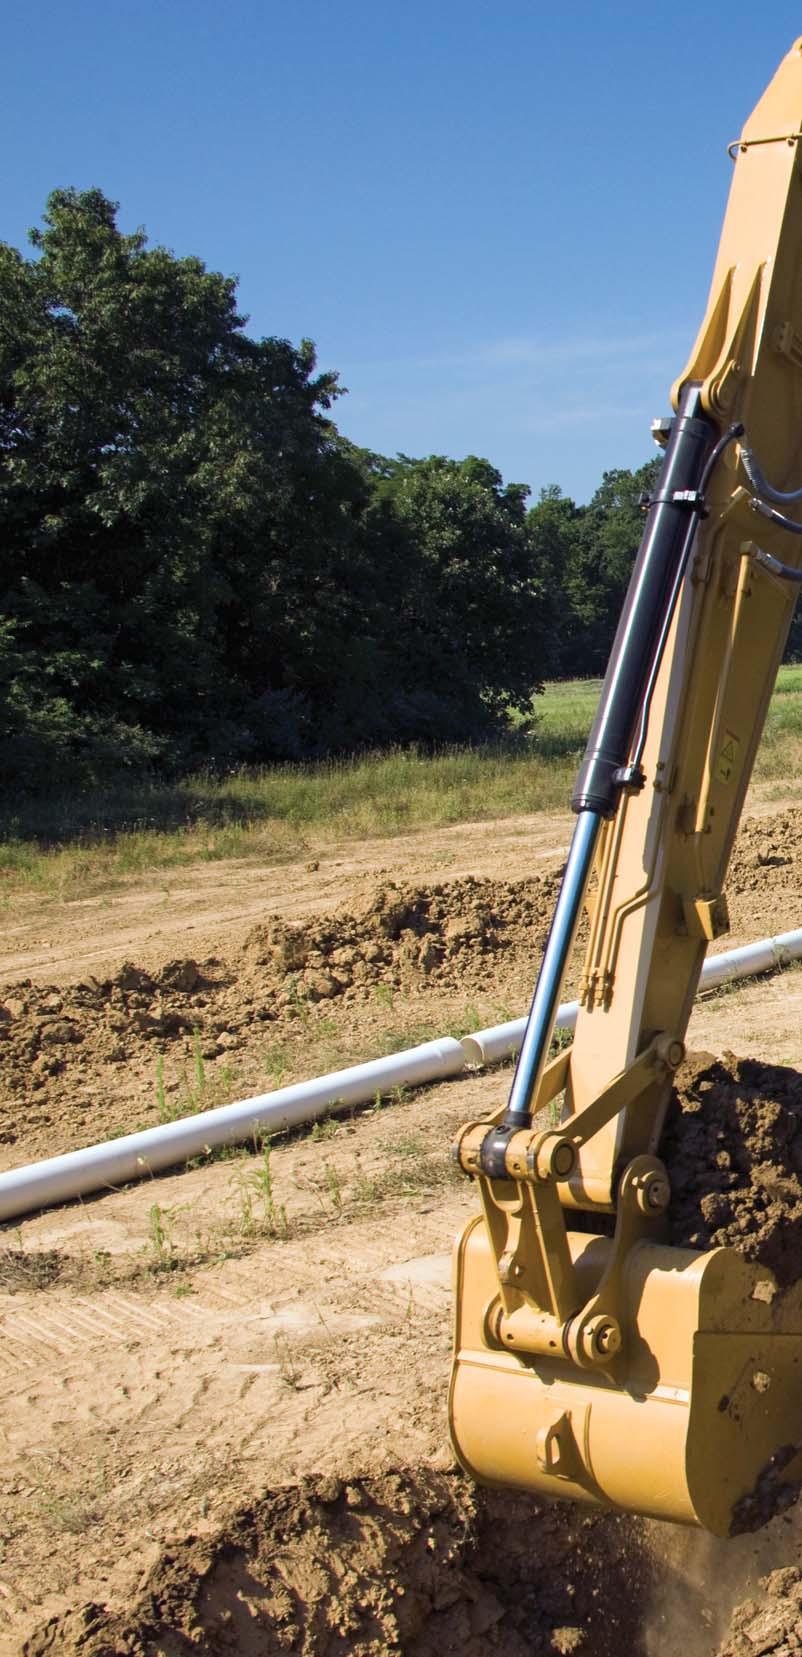 Introduction The Cat 313F L is a perfect choice for customers who value reliability, durability, and maximum efficiency to get work done. Powered by a U.S. EPA Tier 4 Final and EU Stage IV C4.